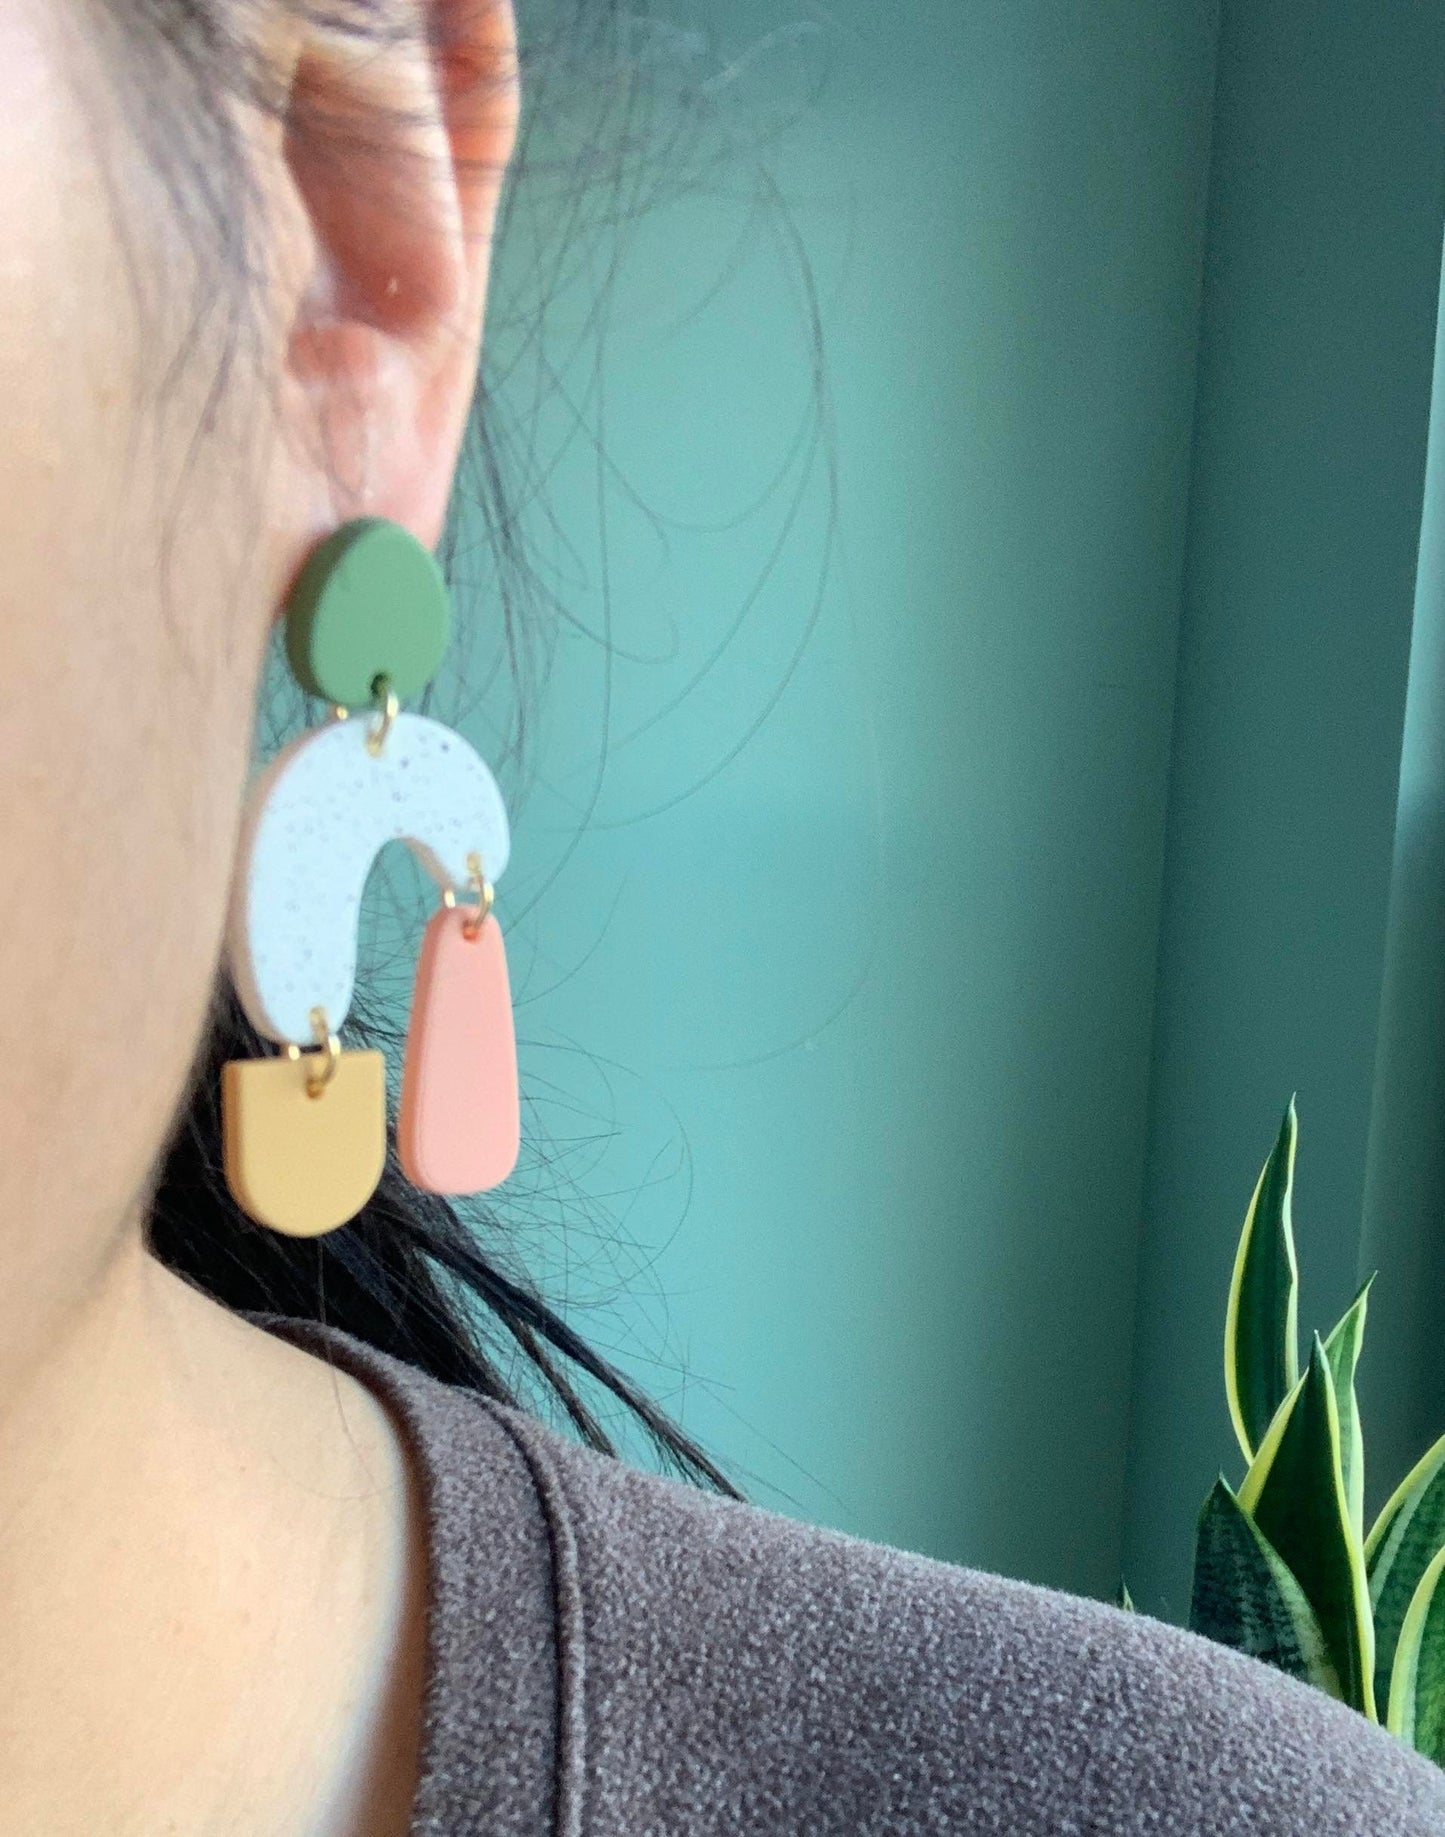 Acrylic Fun with Shapes Earrings (Lightweight)